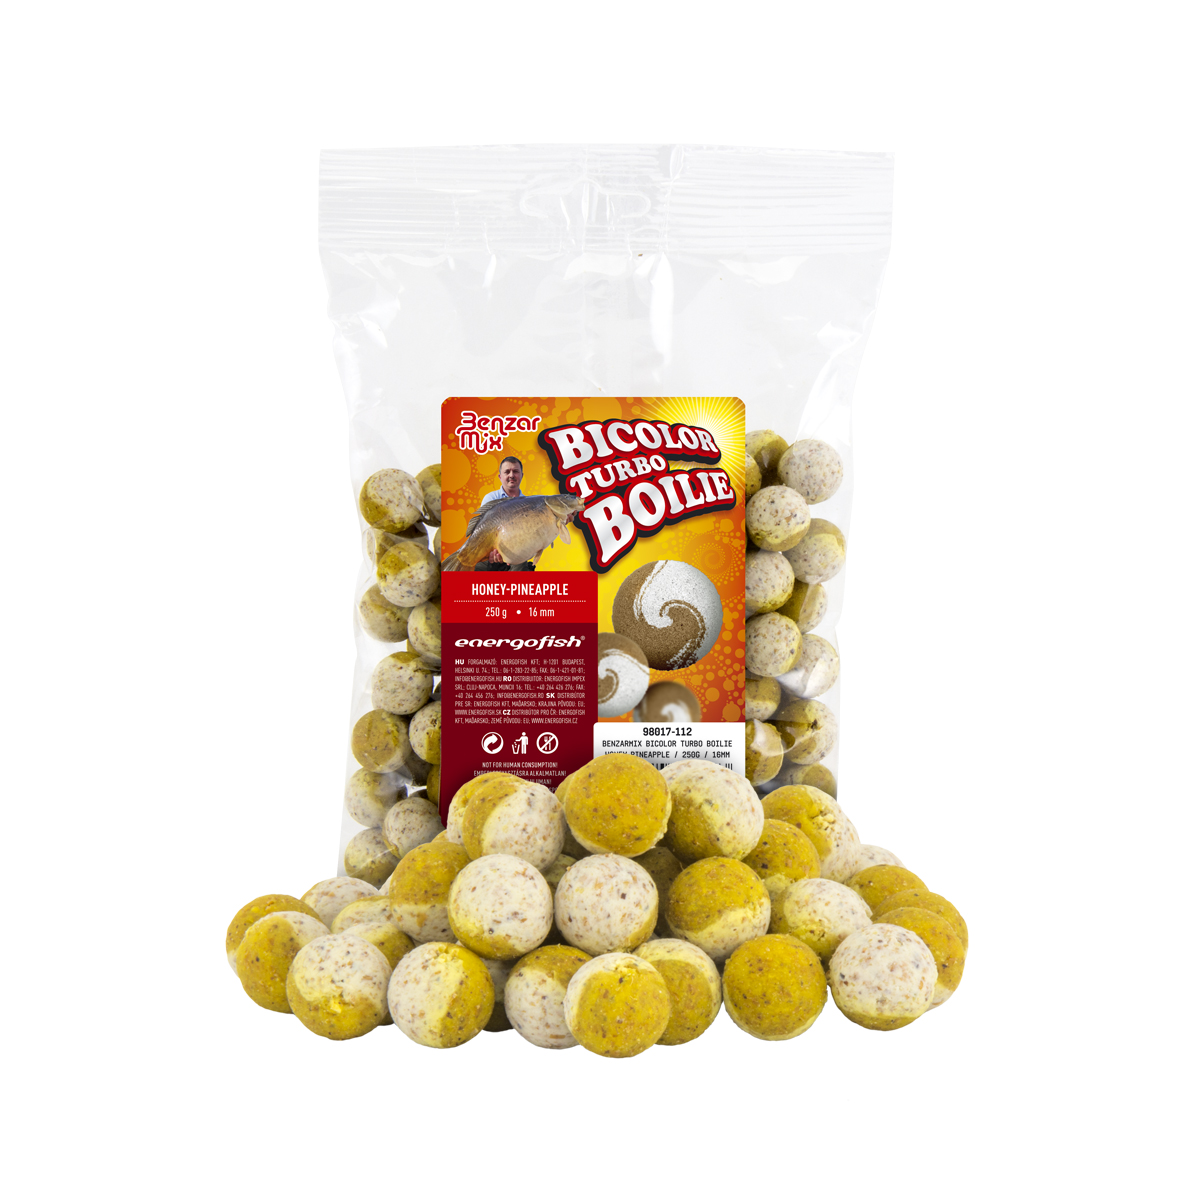 BOILIES Benzar Mix Turbo Boilie Miere-ananas 250g 20mm - 98017102